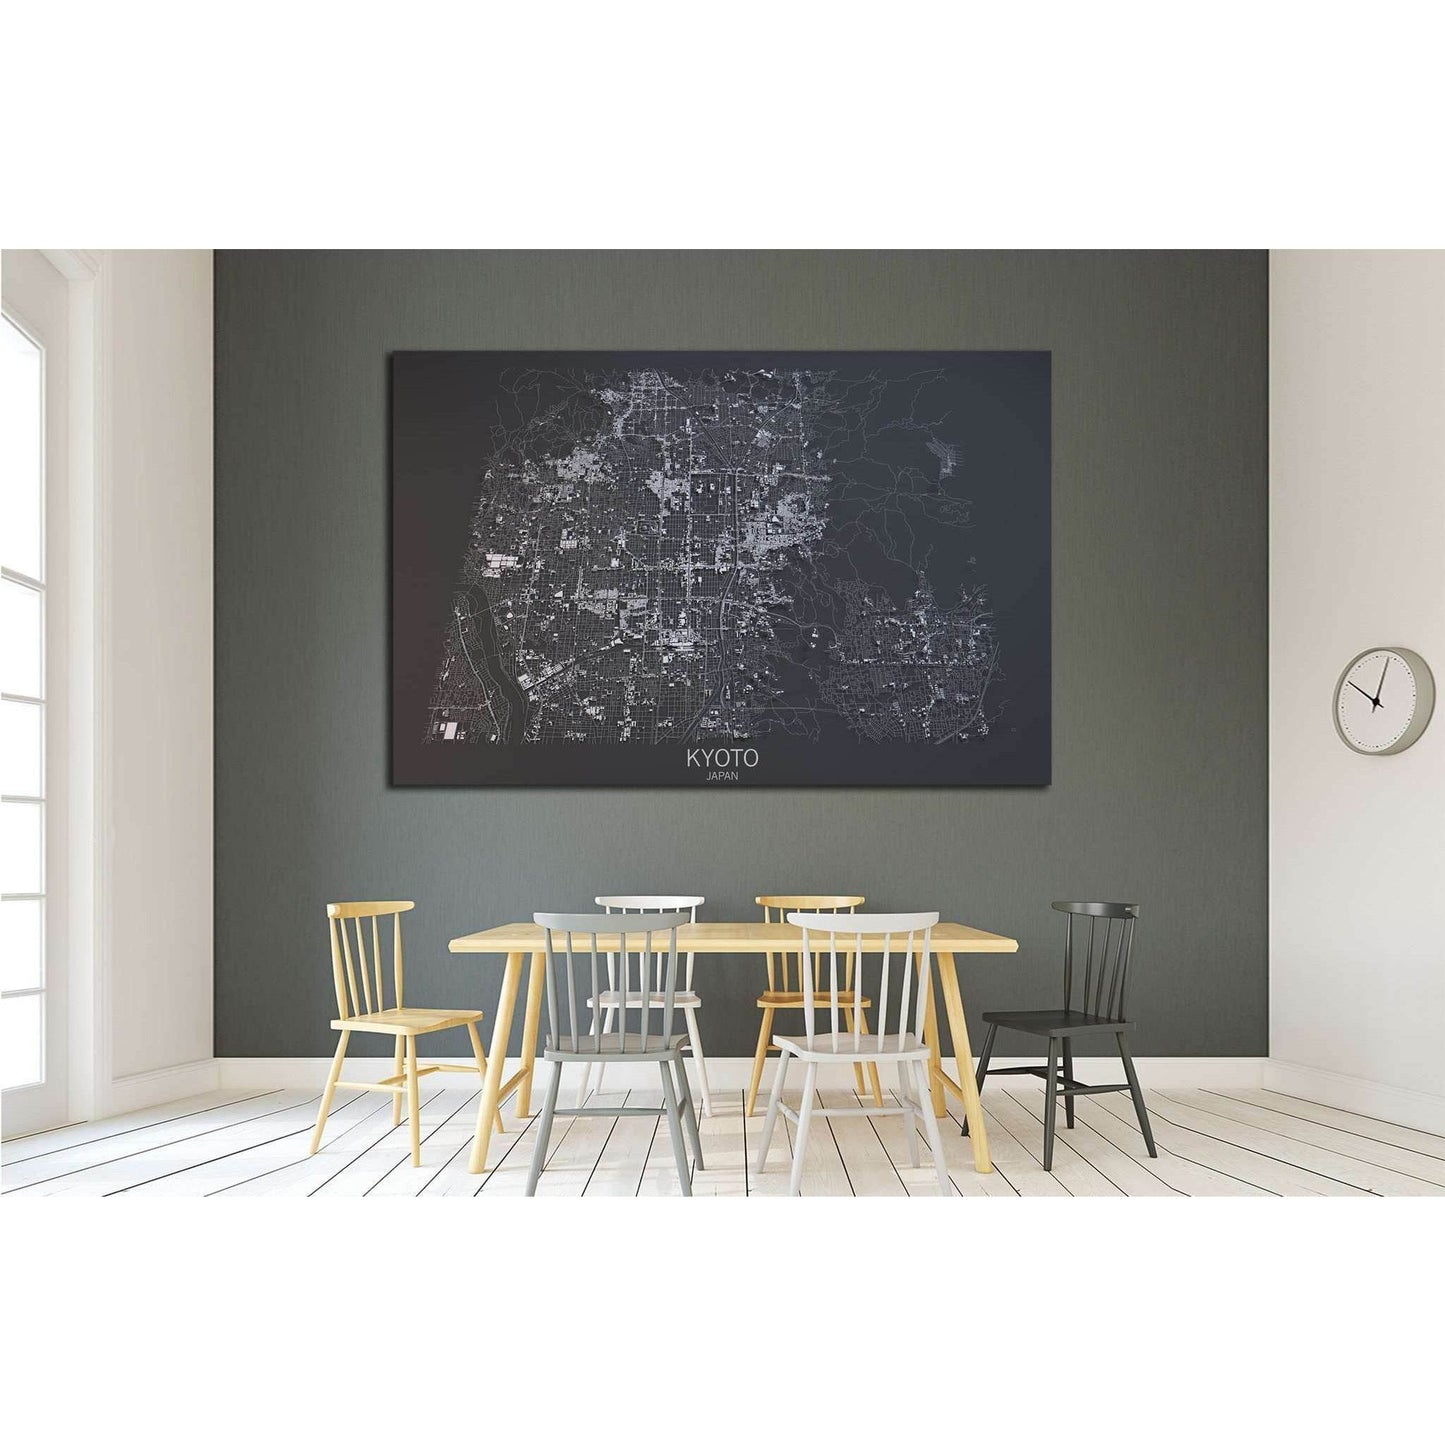 Japan, Koyto City Map Blueprint Canvas ArtDecorate your walls with a stunning Koyto Map Canvas Art Print from the world's largest art gallery. Choose from thousands of Map artworks with various sizing options. Choose your perfect art print to complete you